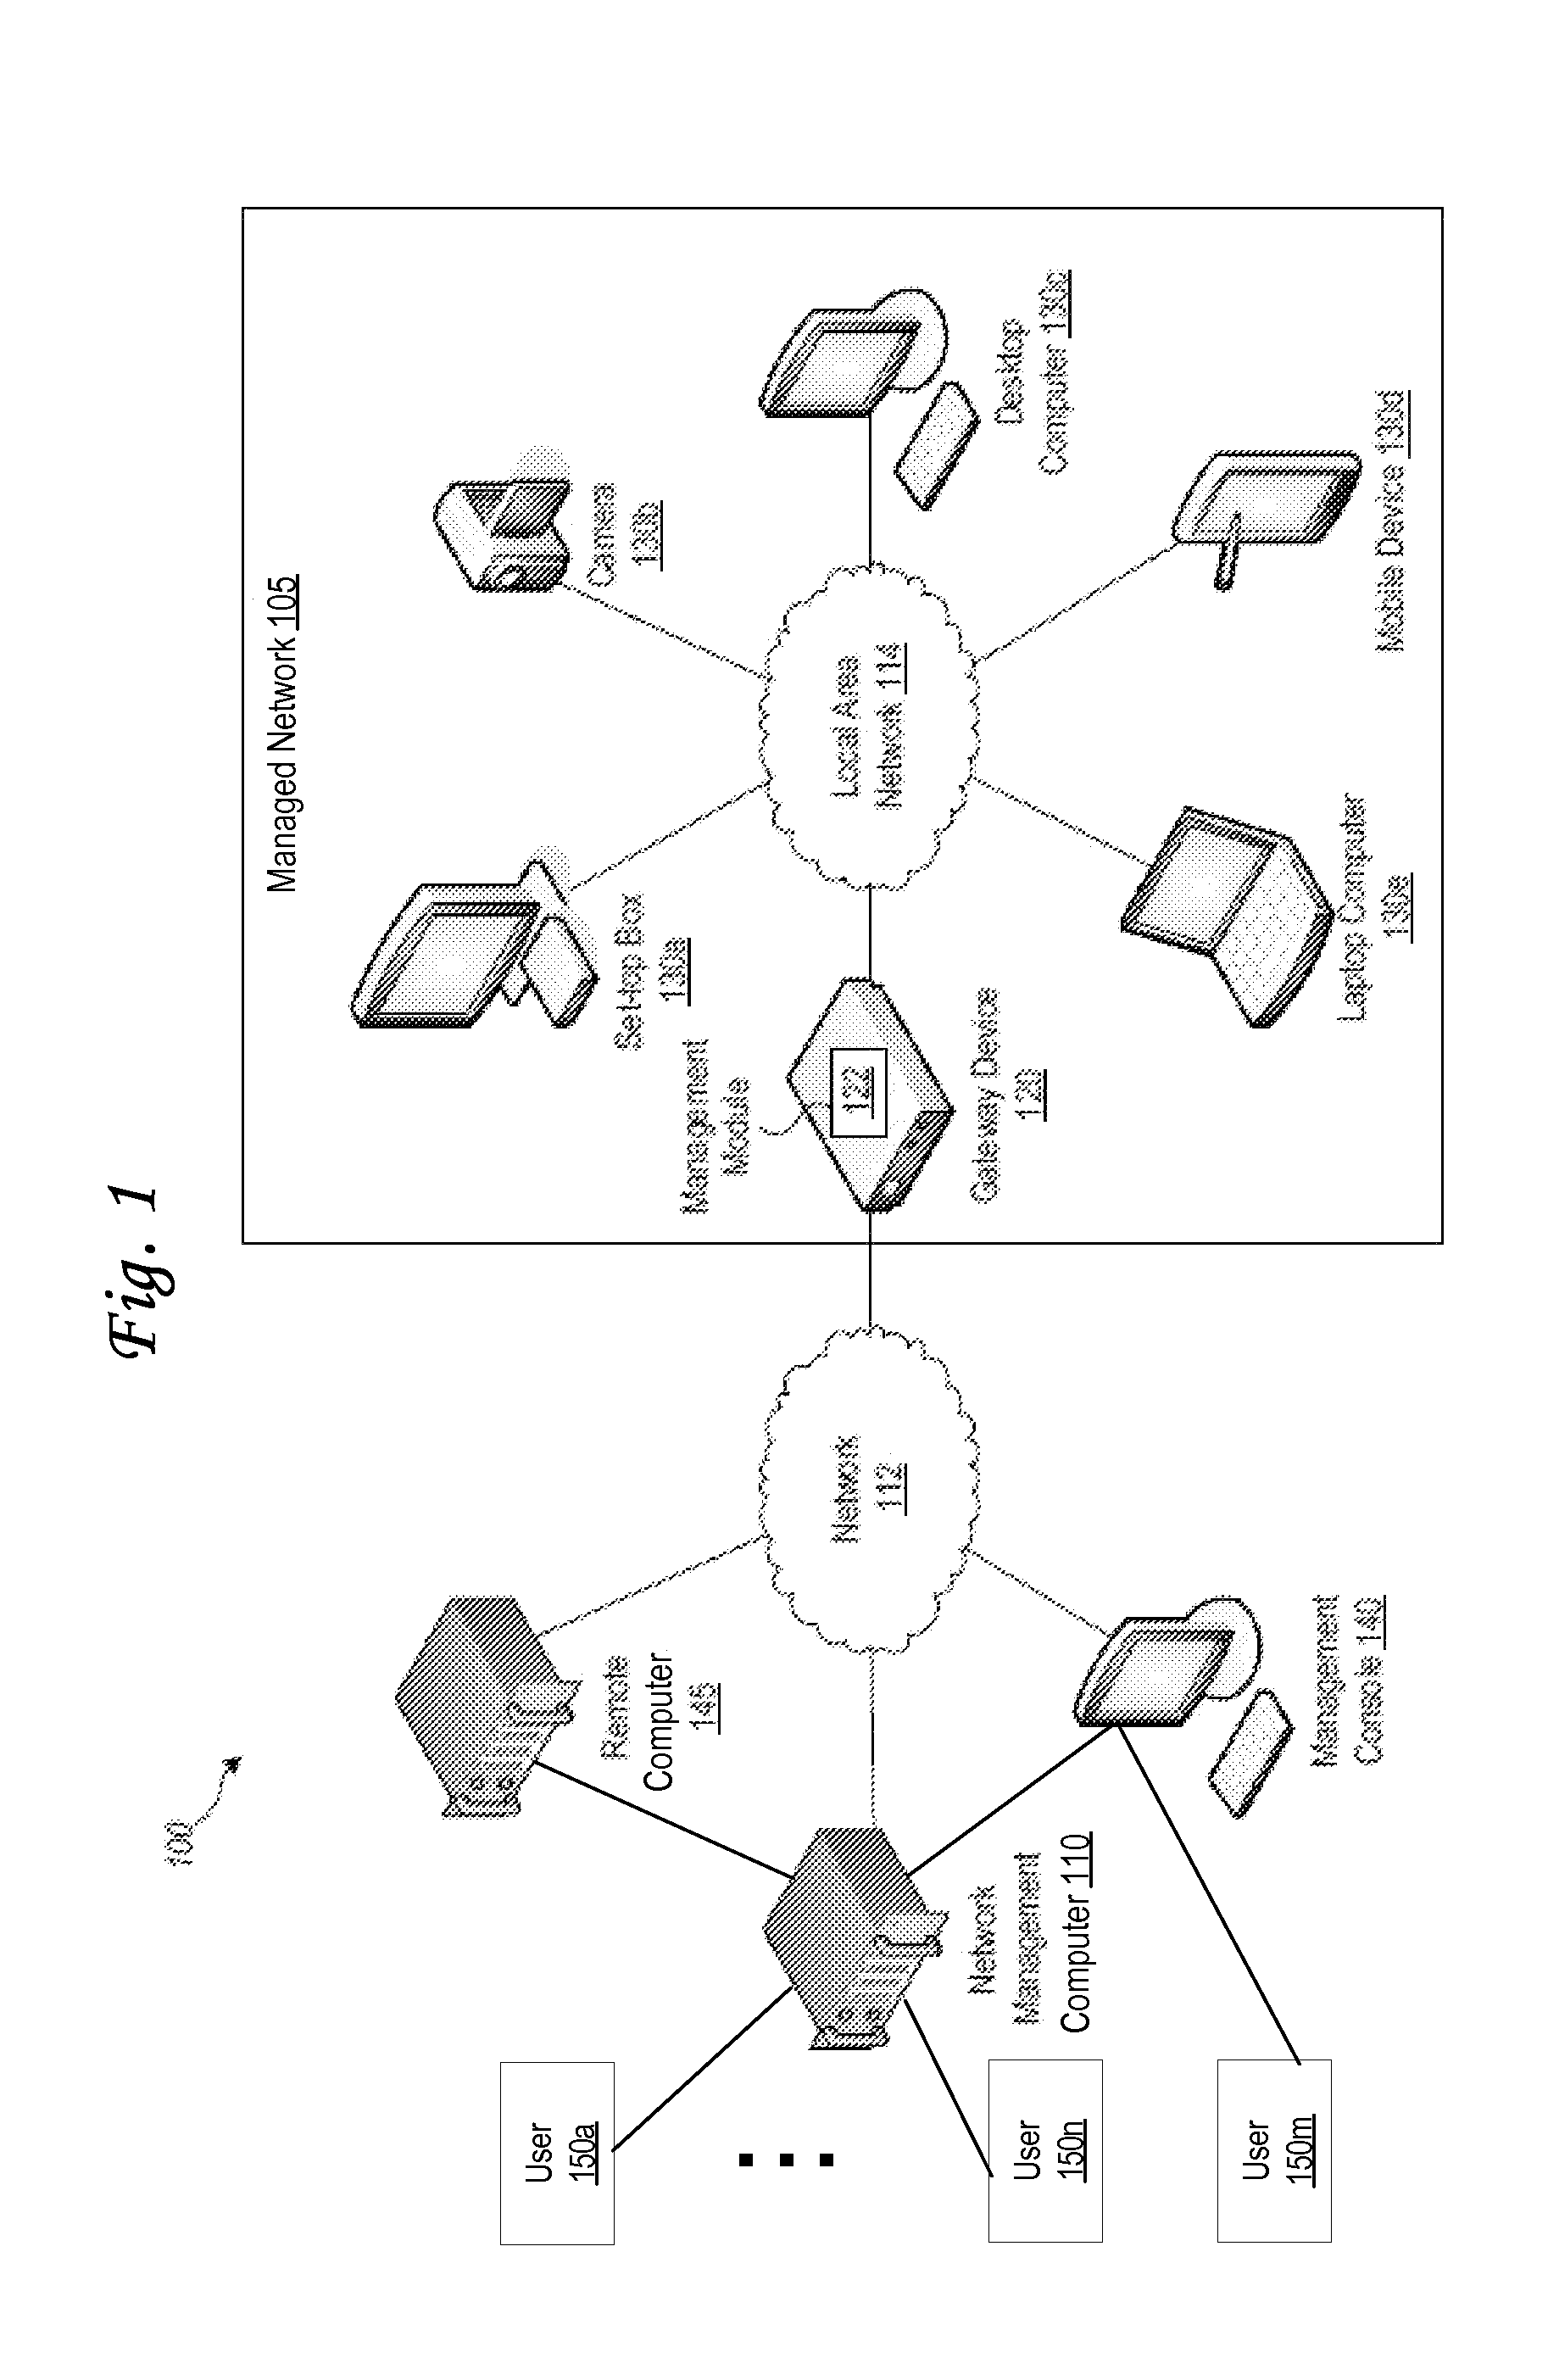 Remote monitoring and controlling of network utilization